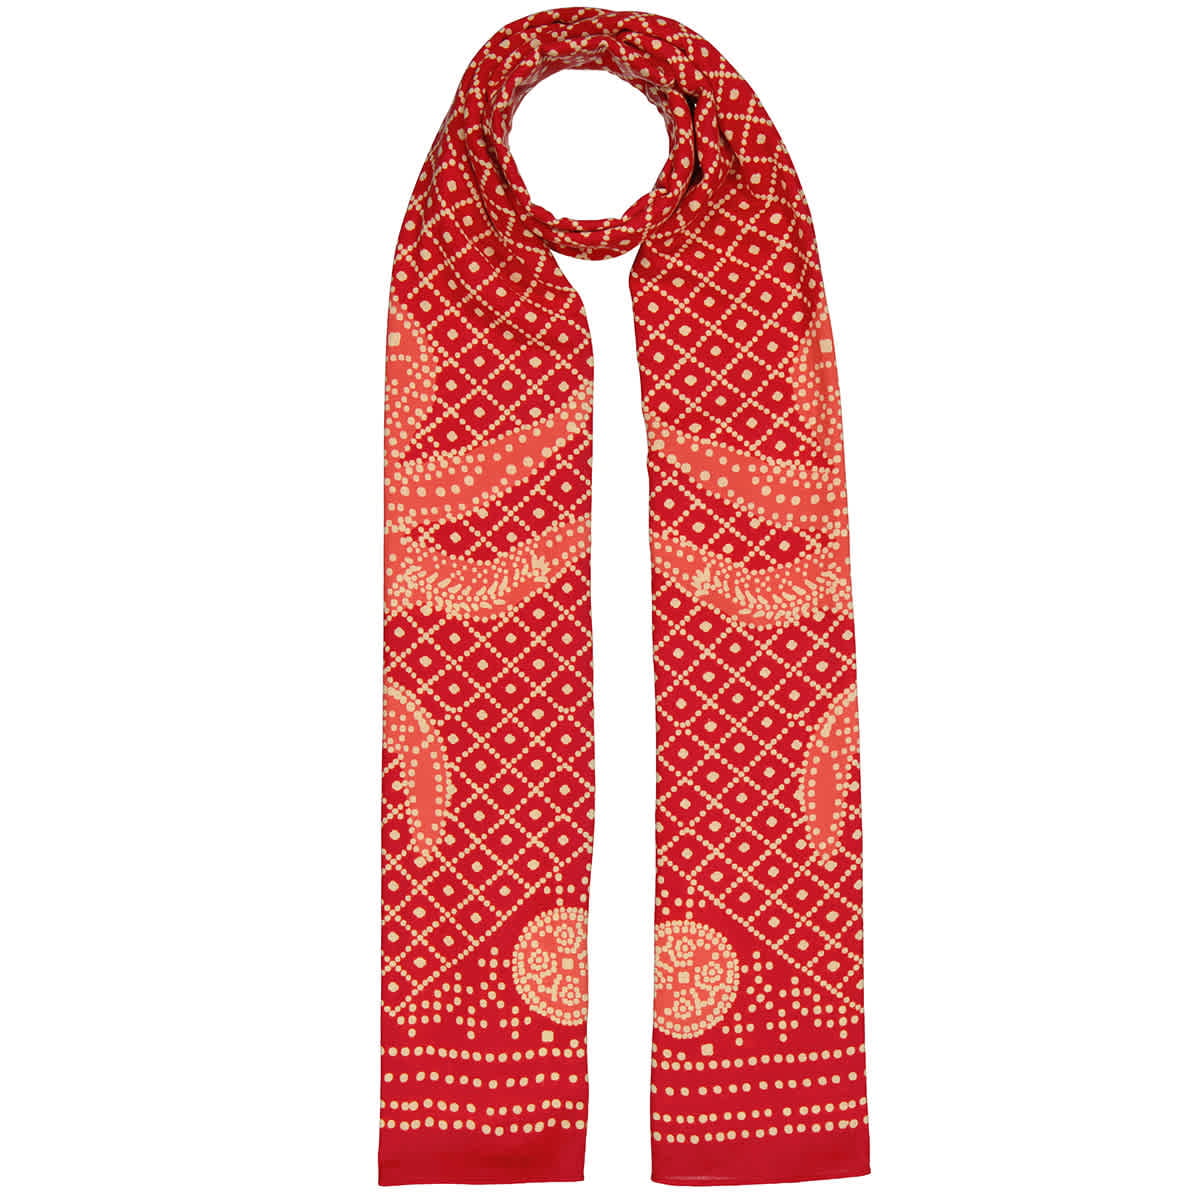 Tory Burch Crab Print Cotton Scarf - Red 